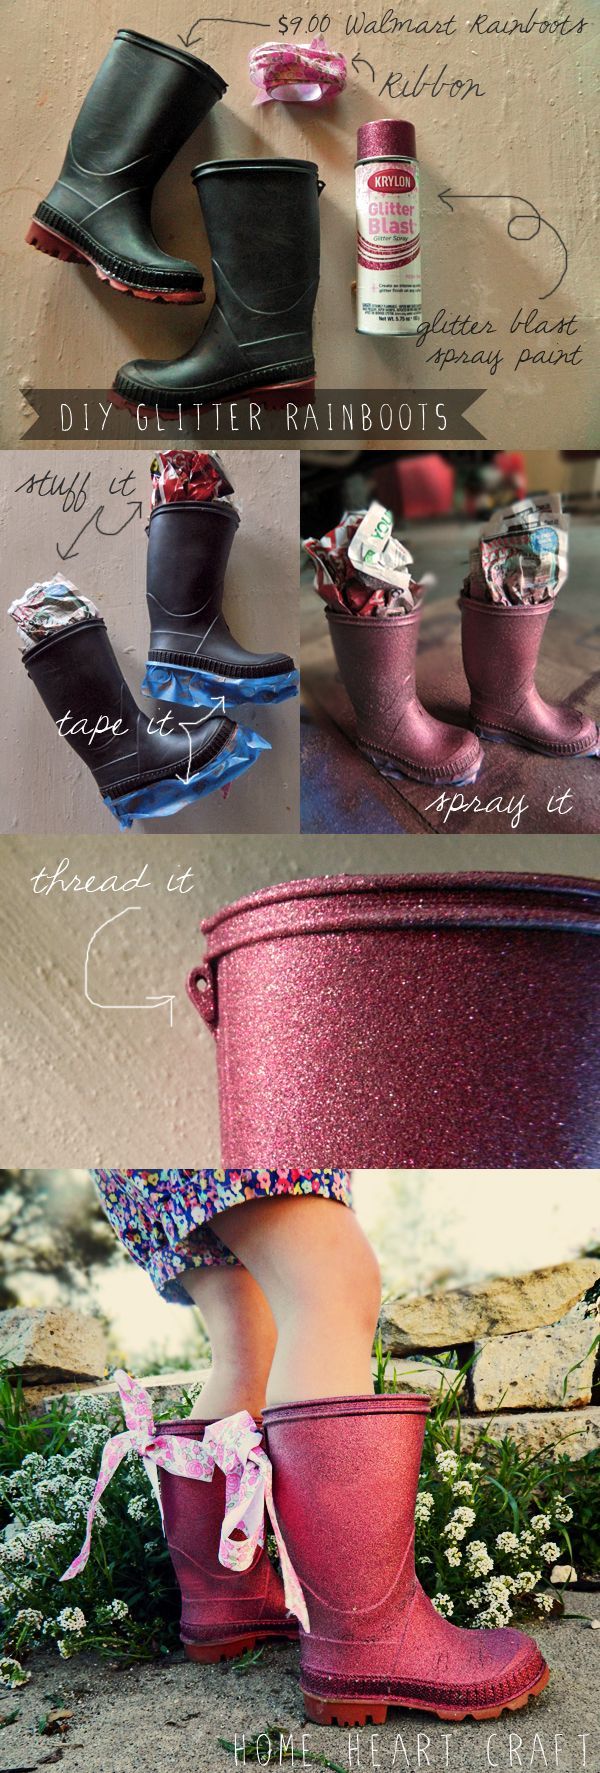 DIY Glitter Rain boots, so cute!  Totally making these for Fin and myself!!!